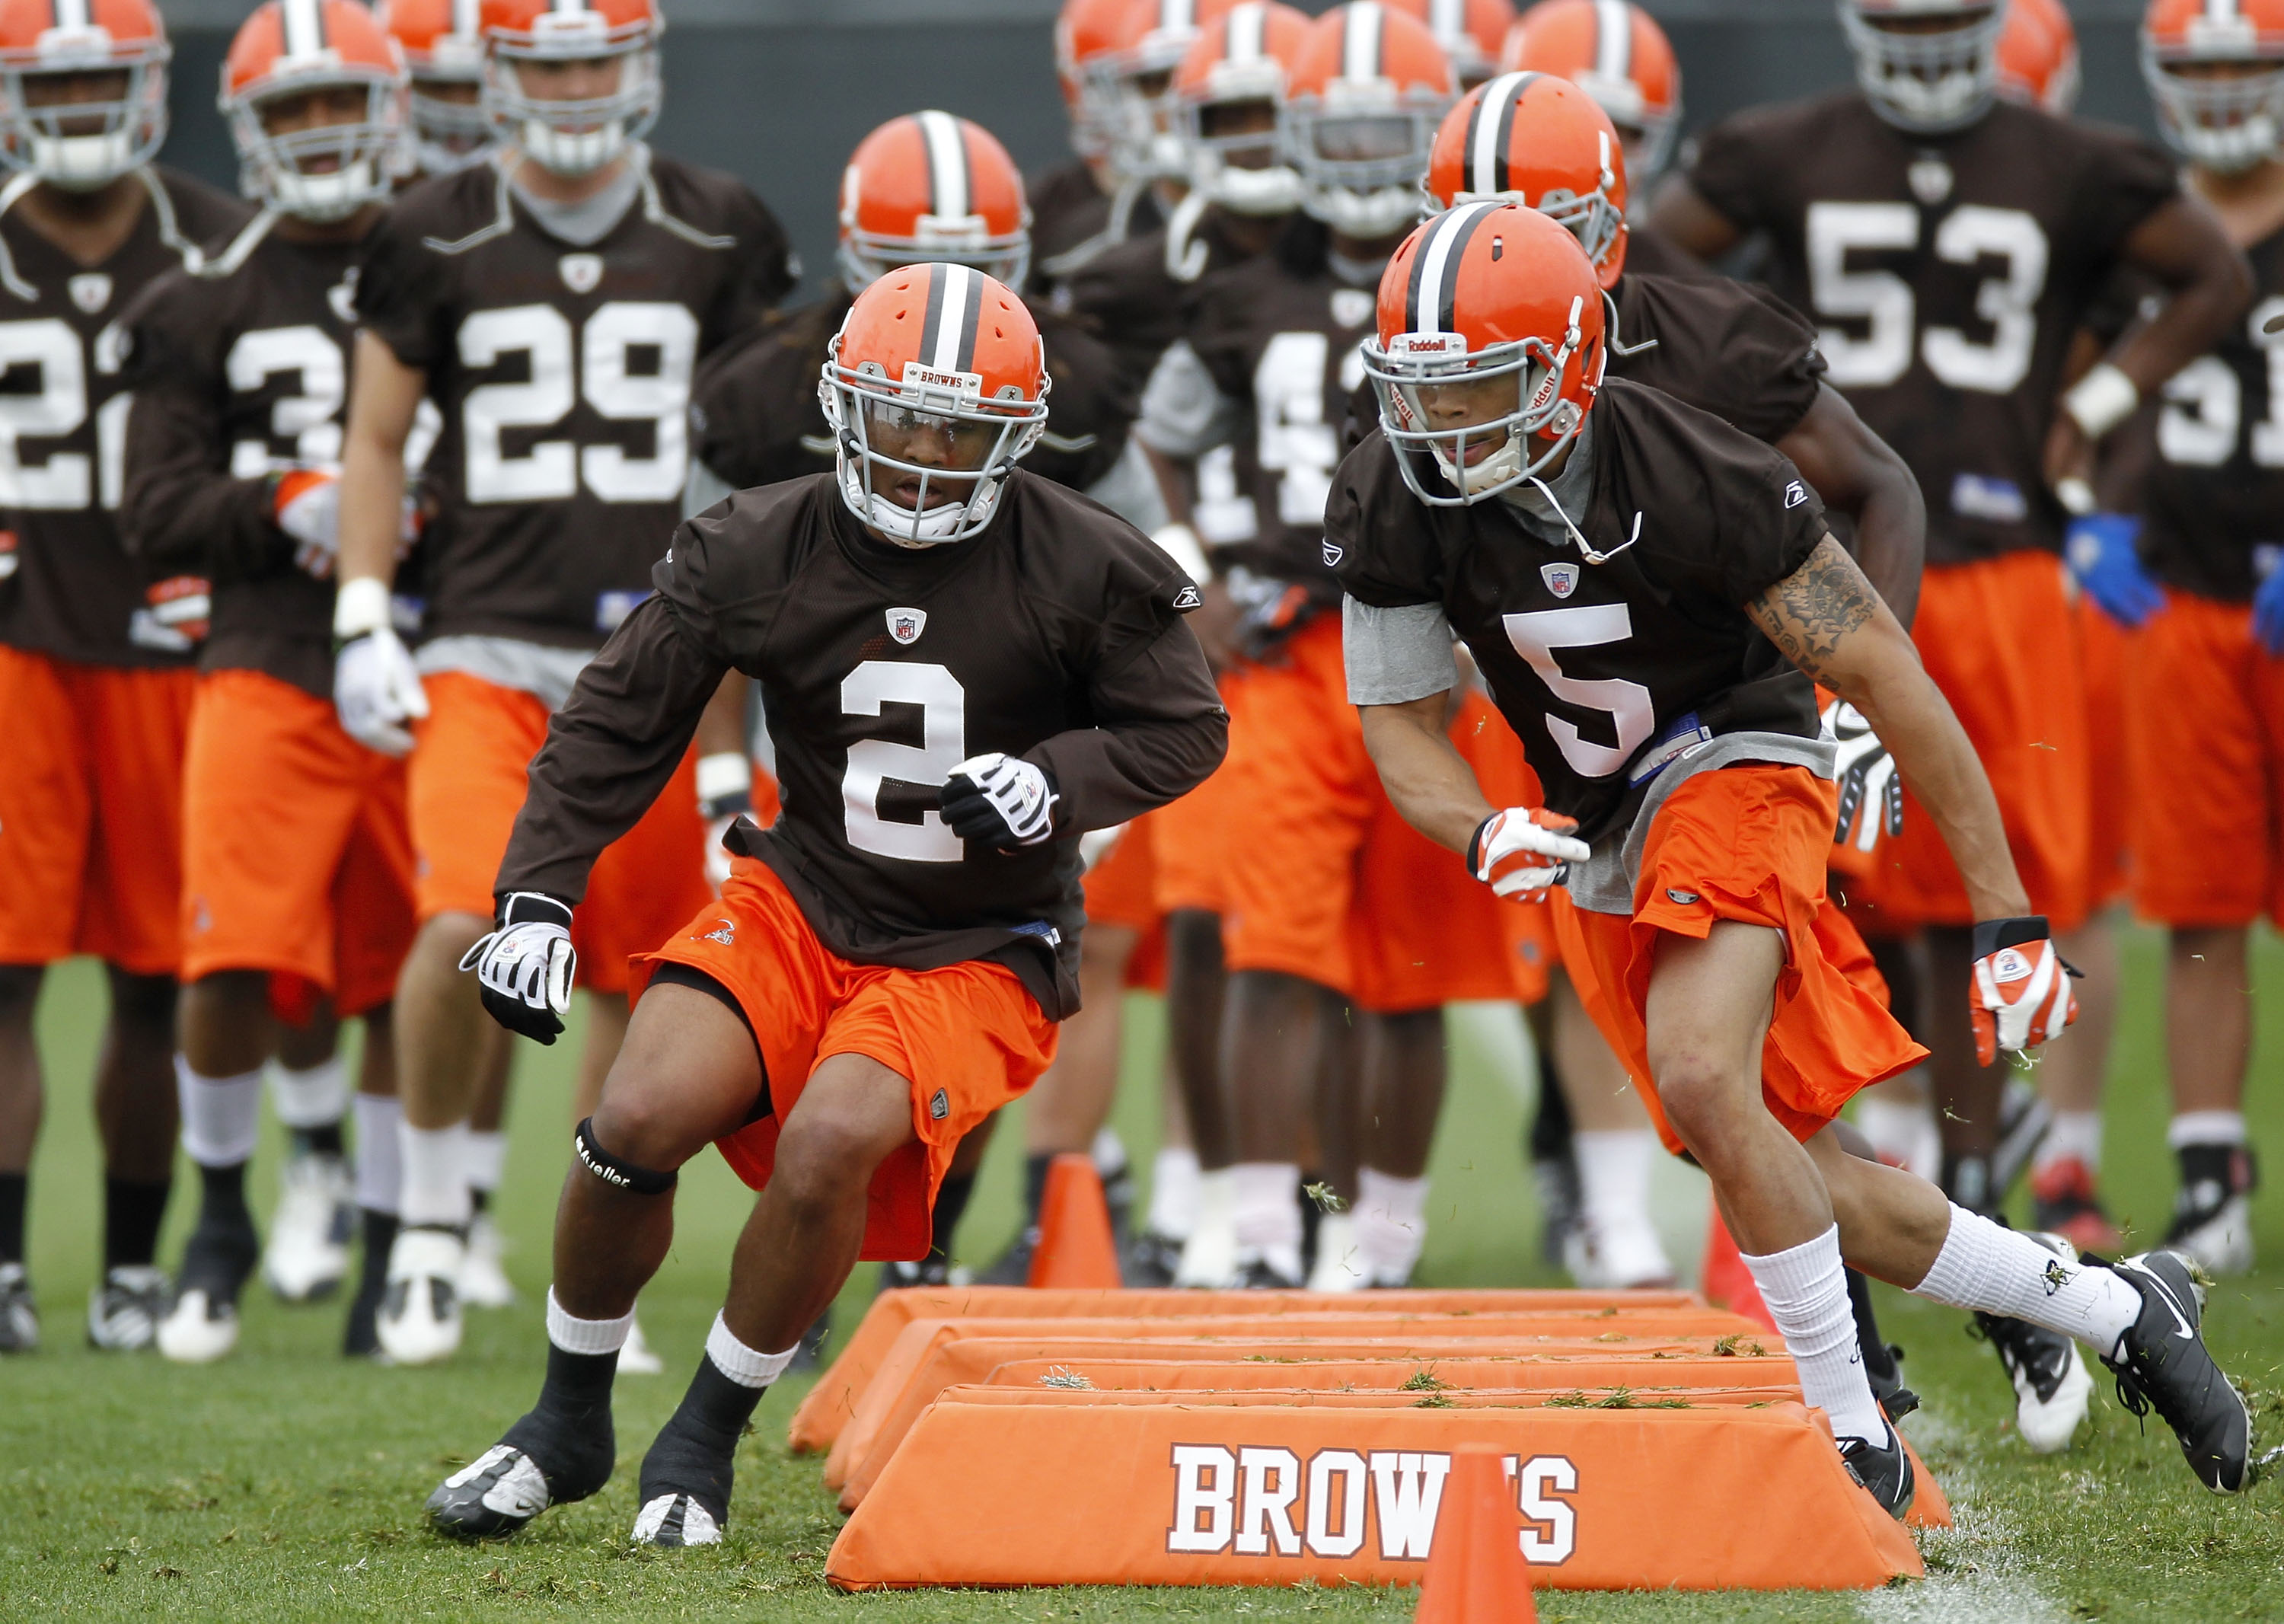 BEREA, OH - MAY 01:  T.J. Ward #2 and Joe Haden #5 of the Cleveland Browns run through a drill during rookie mini camp at the Cleveland Browns Training and Administrative Complex on May 1, 2010 in Berea, Ohio.  (Photo by Gregory Shamus/Getty Images)